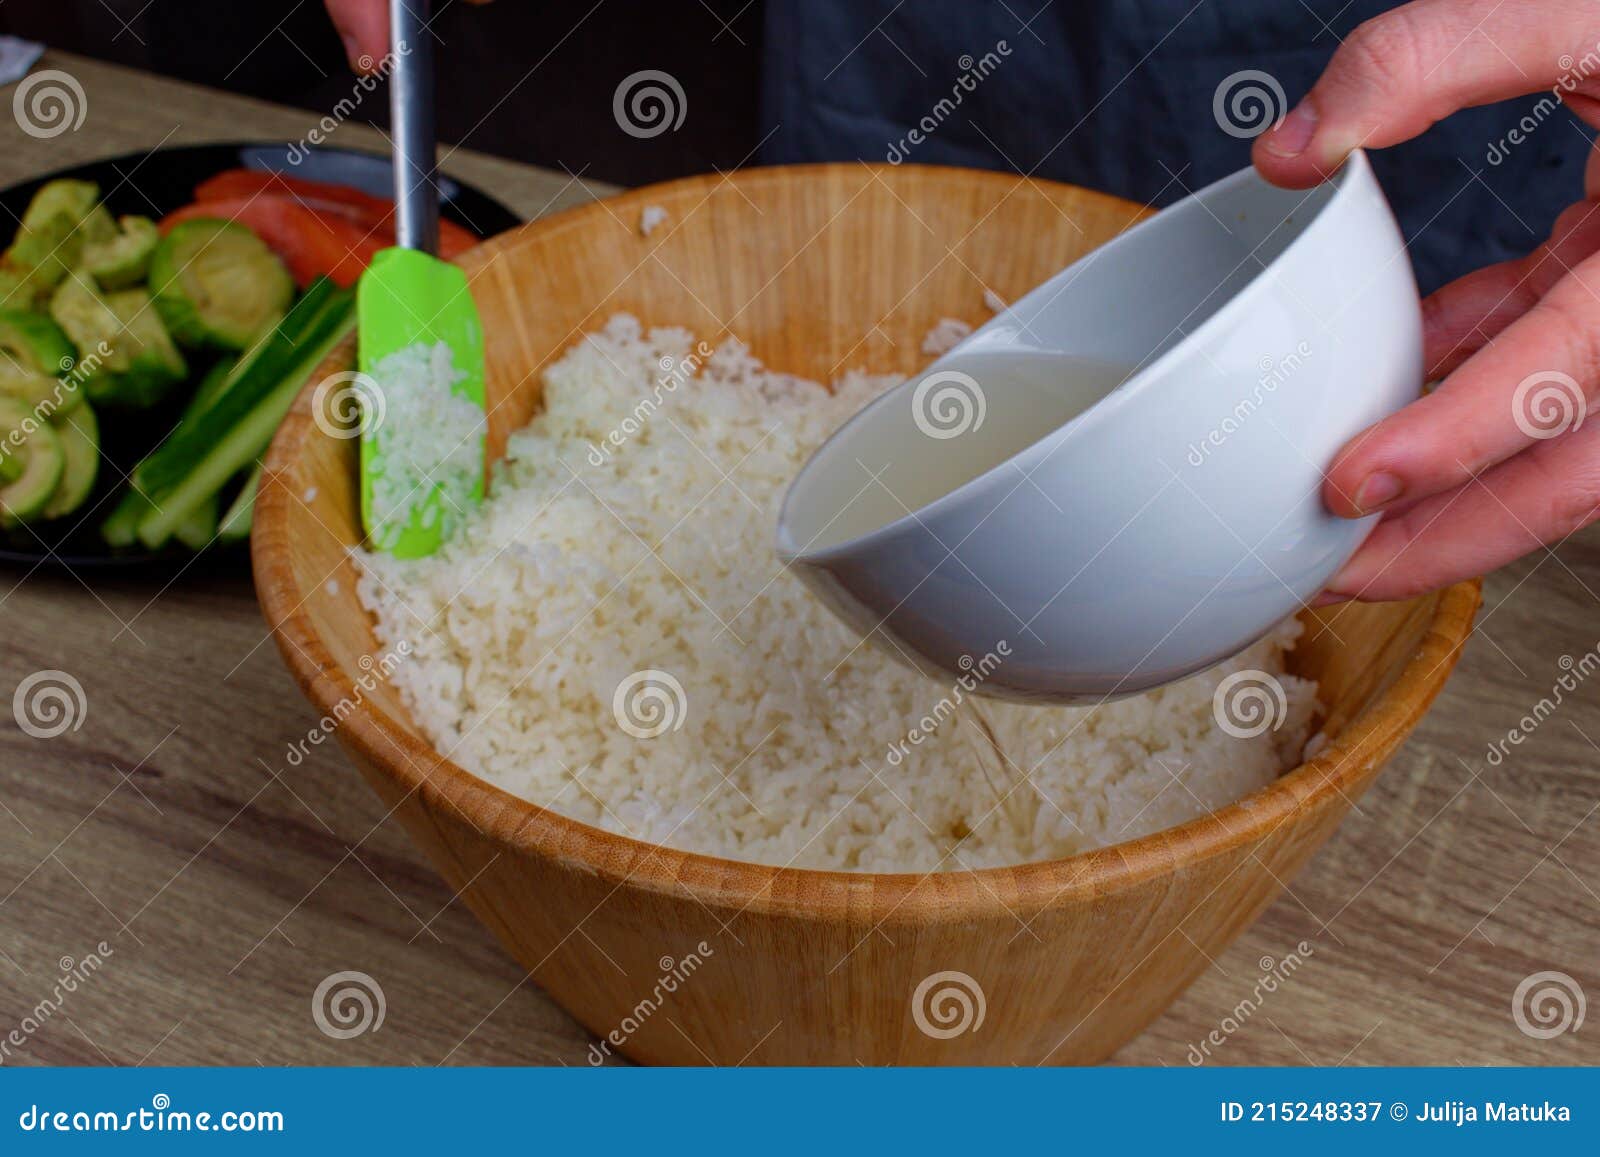 texture Foreword slogan Add the Sauce To the Round Sushi Rice in a Wooden Bowl Stock Image - Image  of japan, preparation: 215248337